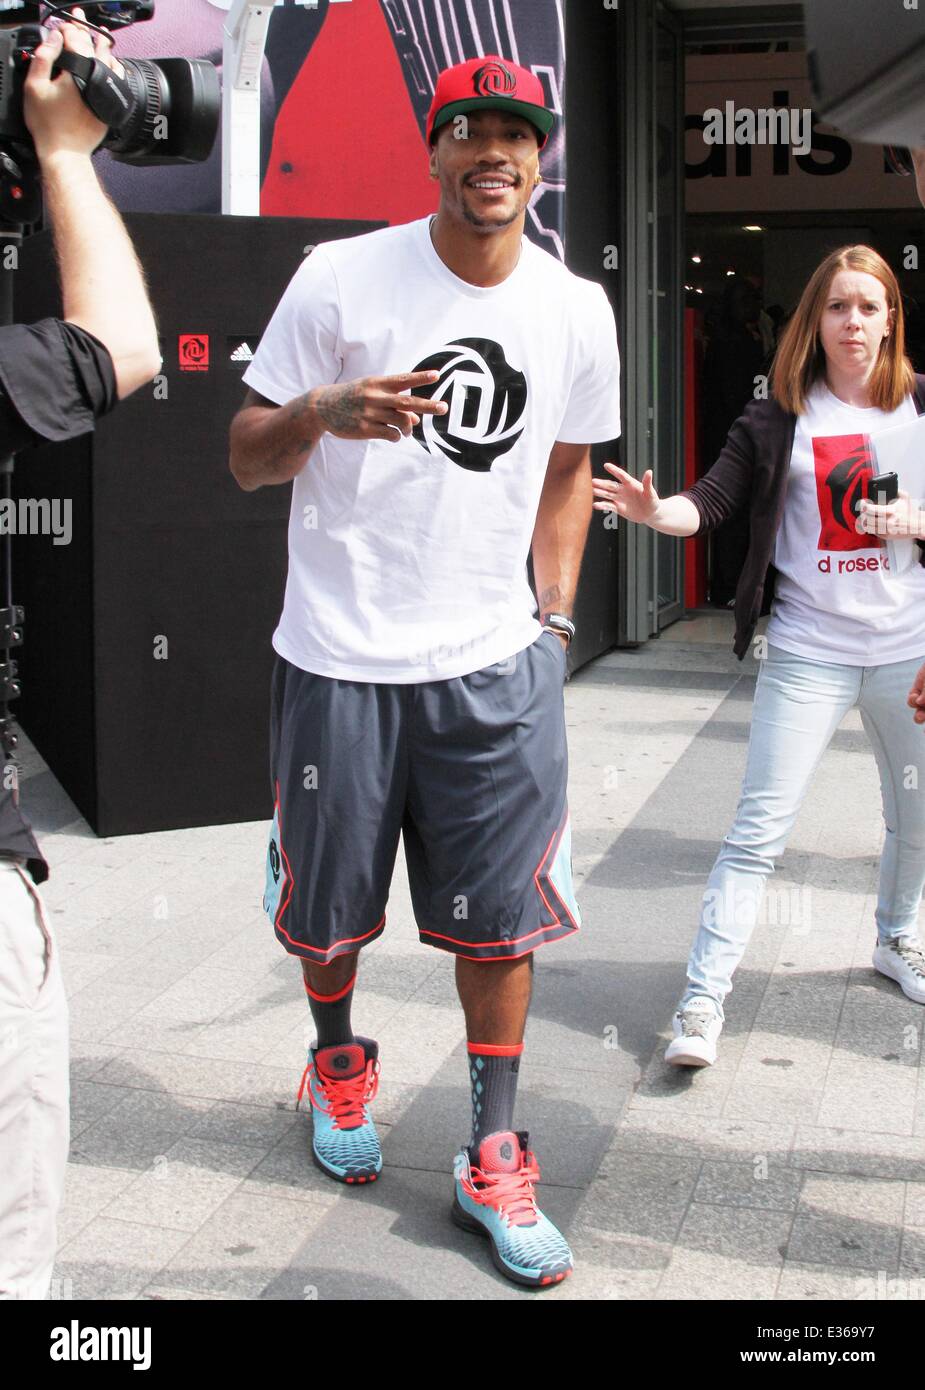 Chicago Bulls player Derrick Rose attends an in-store Adidas promotional  event near Champs Elysees Featuring: Derrick Rose Where: Paris, France  When: 13 Jul 2013 **Not available for publication in France, Netherlands,  Belgium,